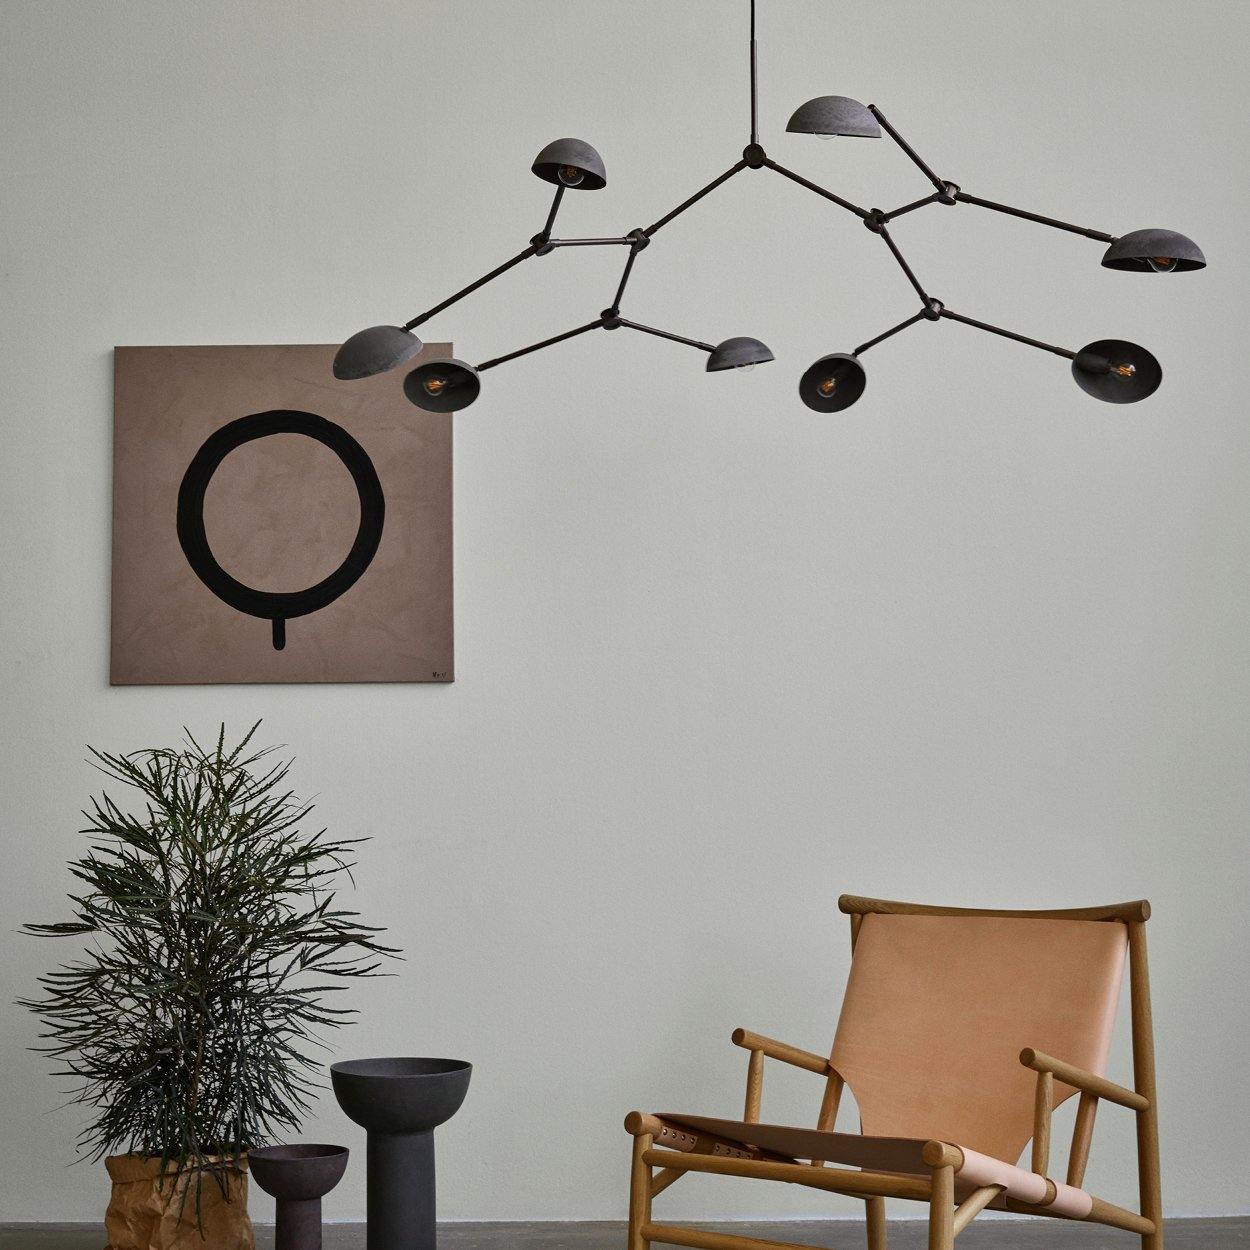 Oxidized 101 CPH DROP Chandelier in a living room- Luminesy